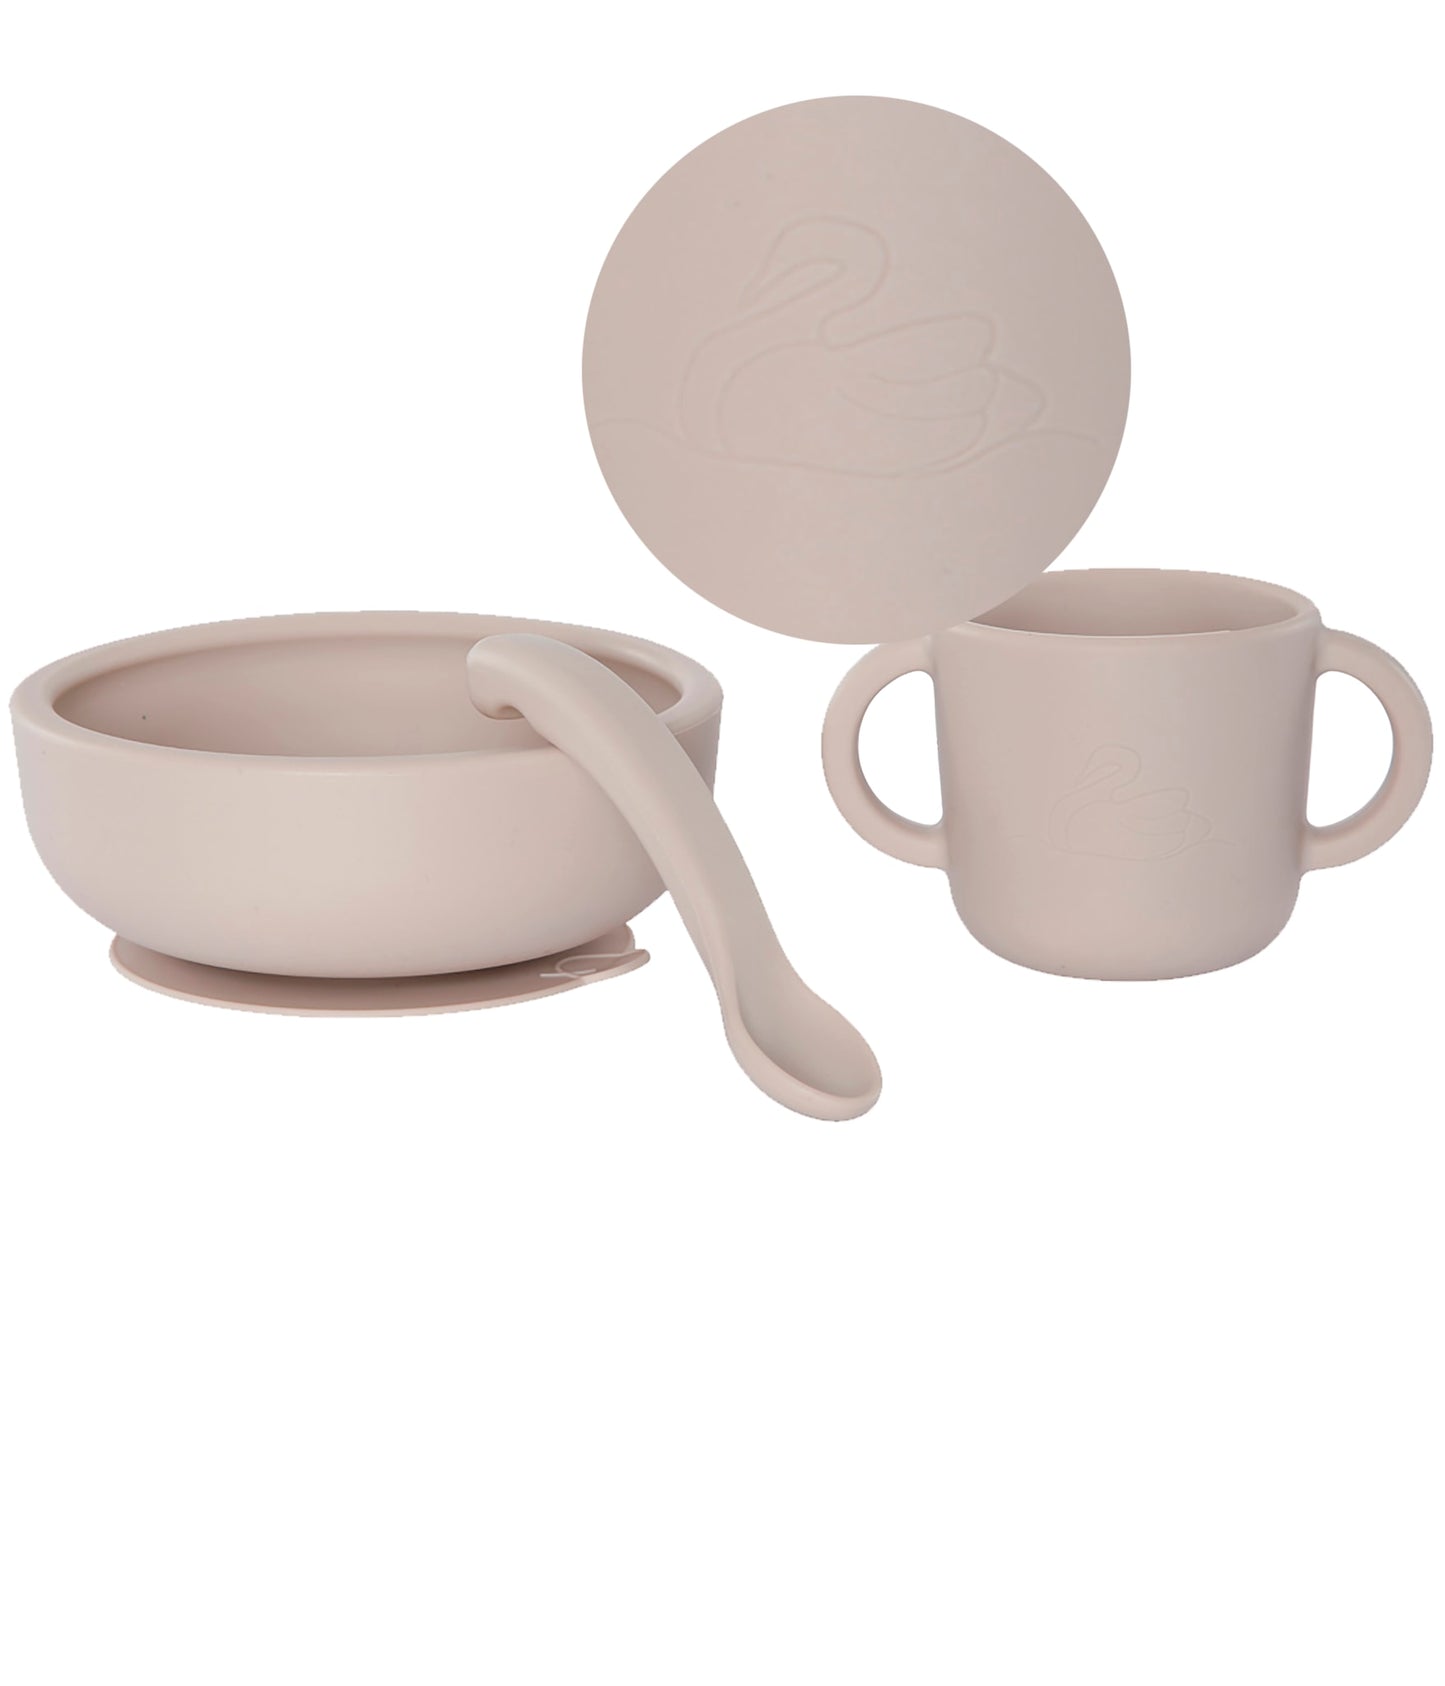 Baby Dinner set - bowl w/cup and spoon